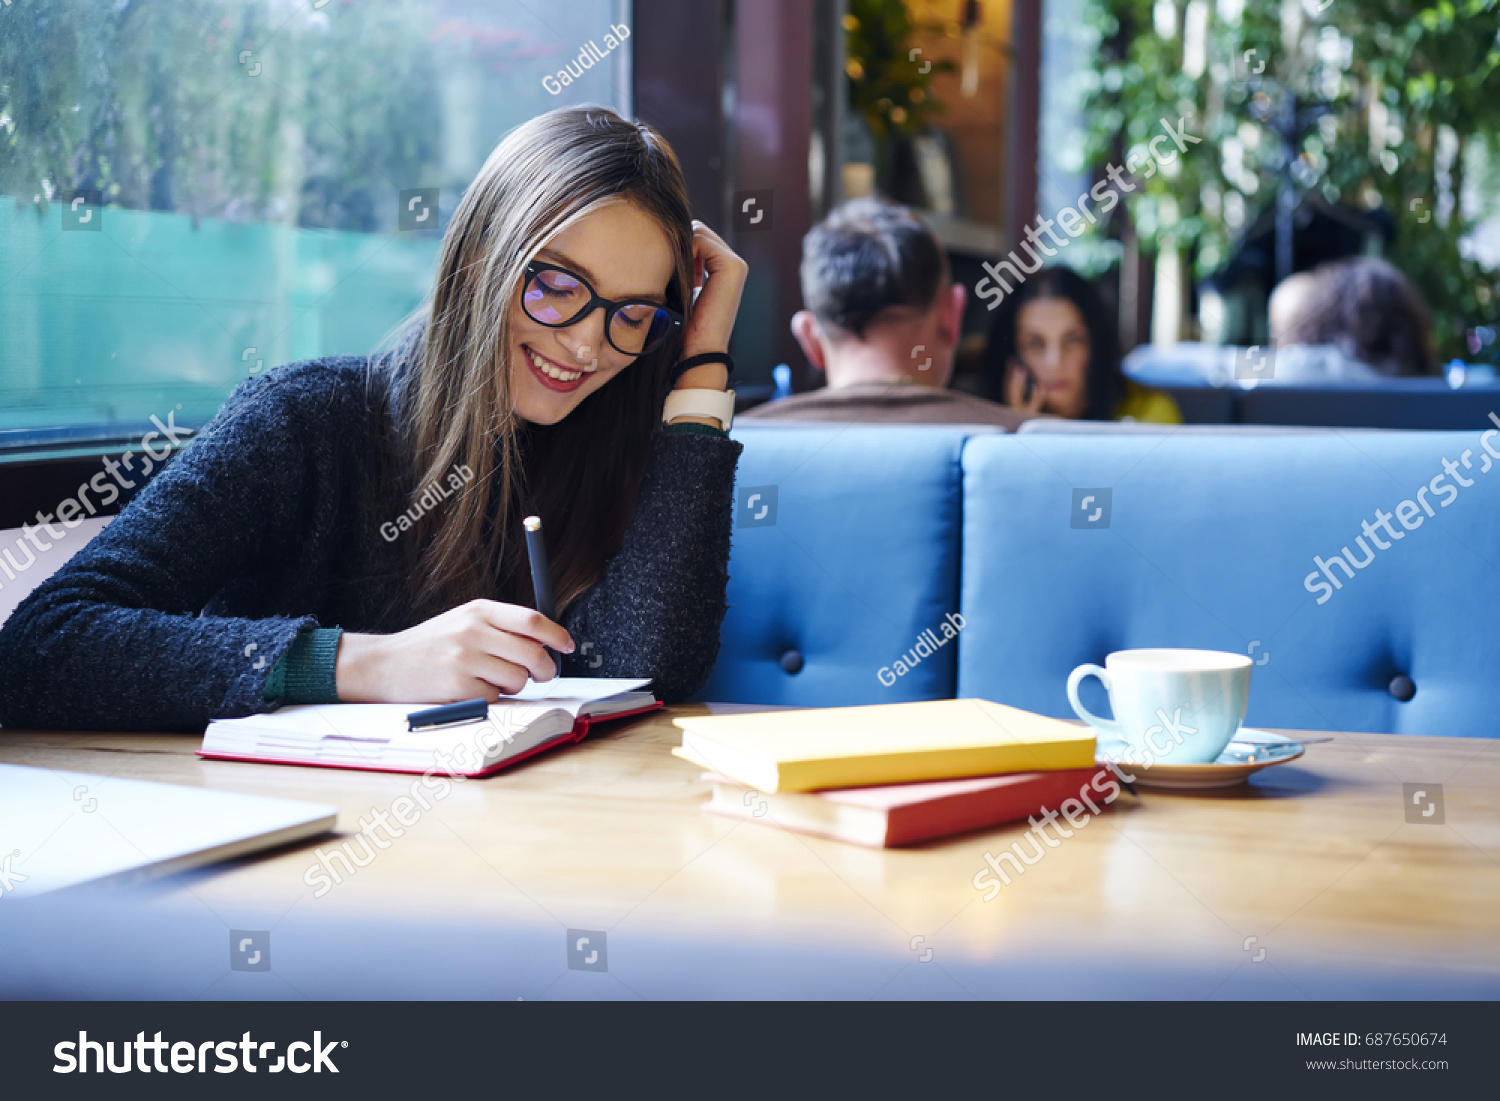 Positive female student in stylish eyeglasses with good lense writing down funny story in notebook sitting in coffee shop with cup of cappuccino and books.Smiling female noting text in notepad #687650674